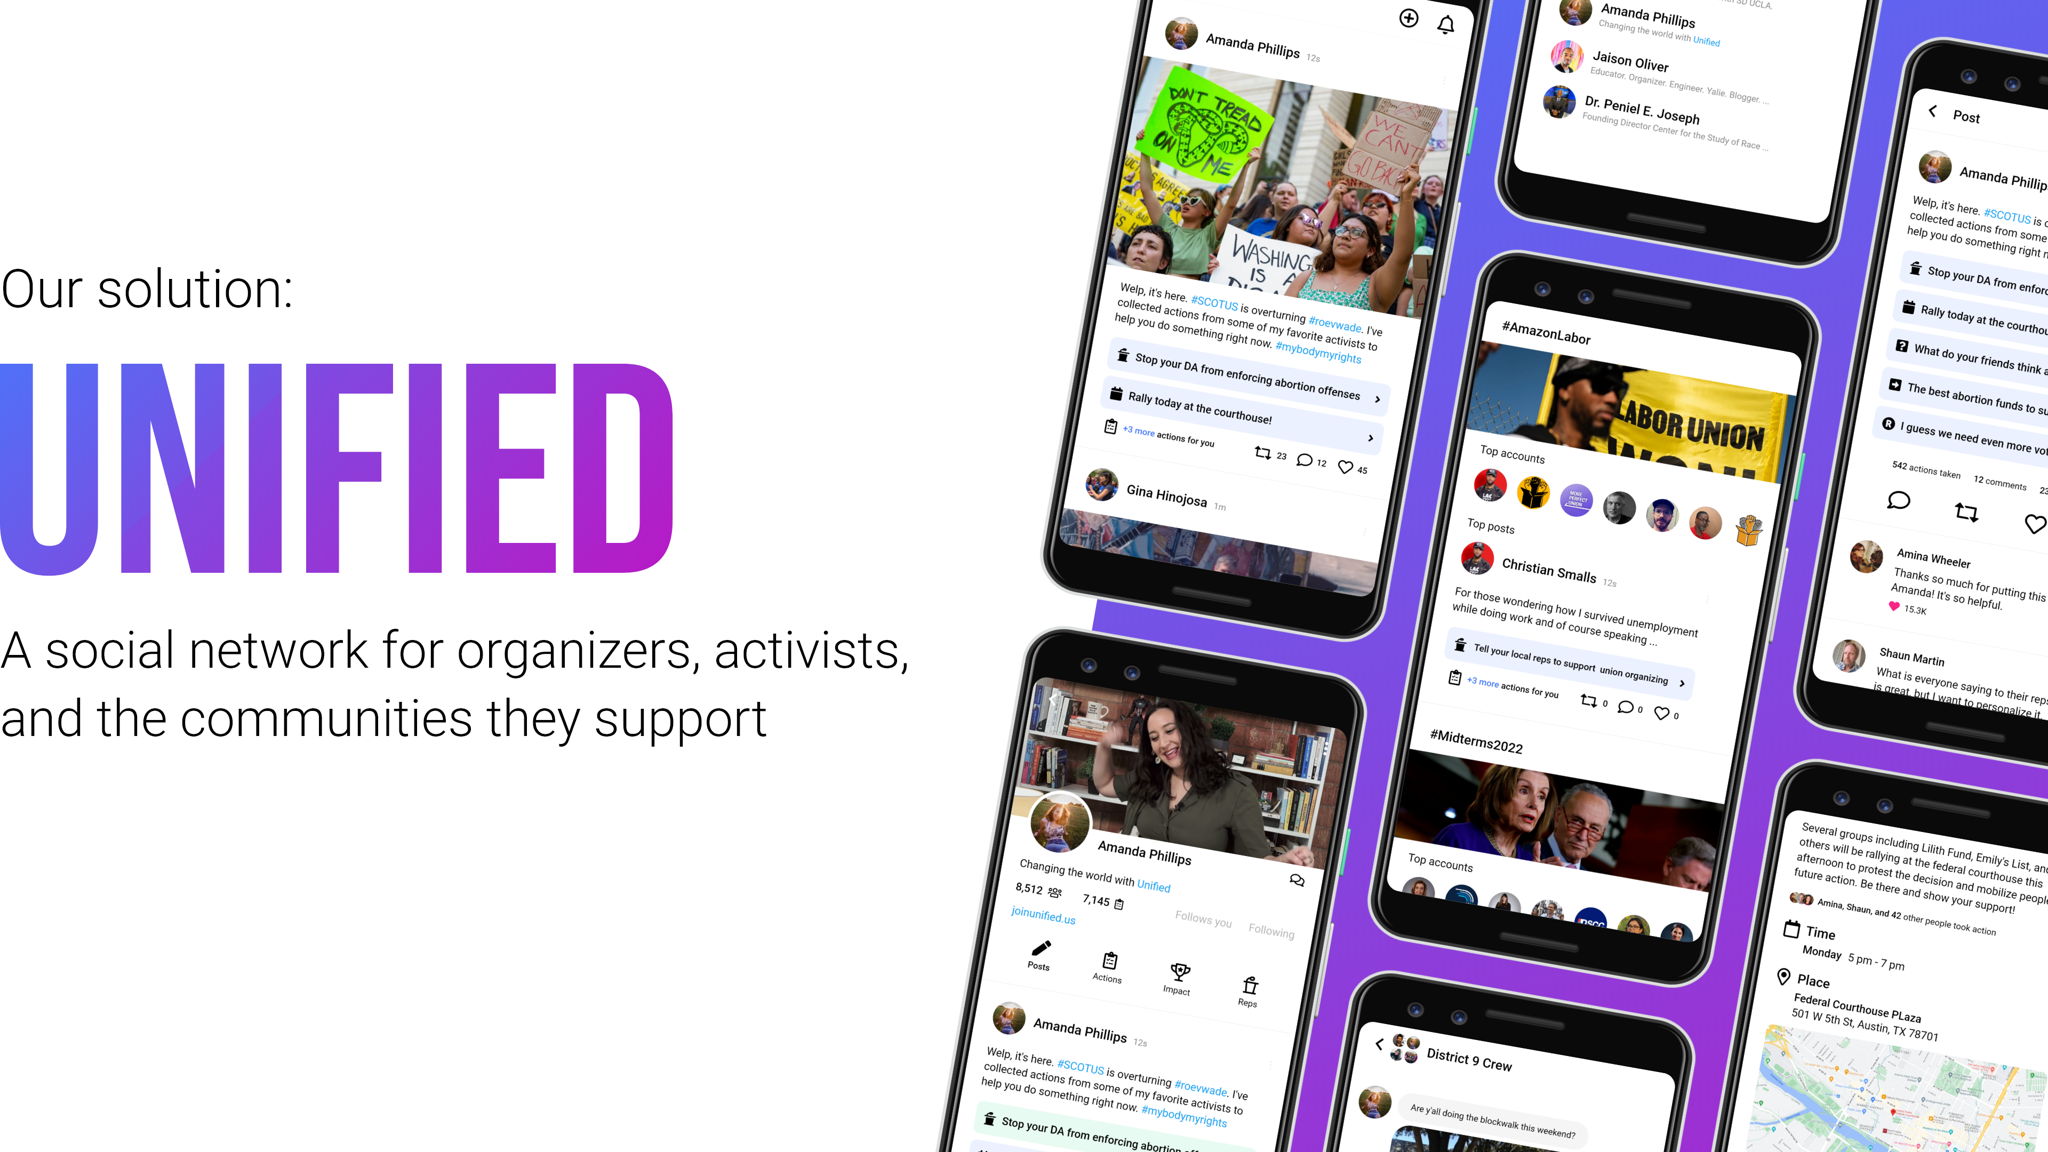 Our solution: Unified, a social network for organizers, activists, and the communities they support